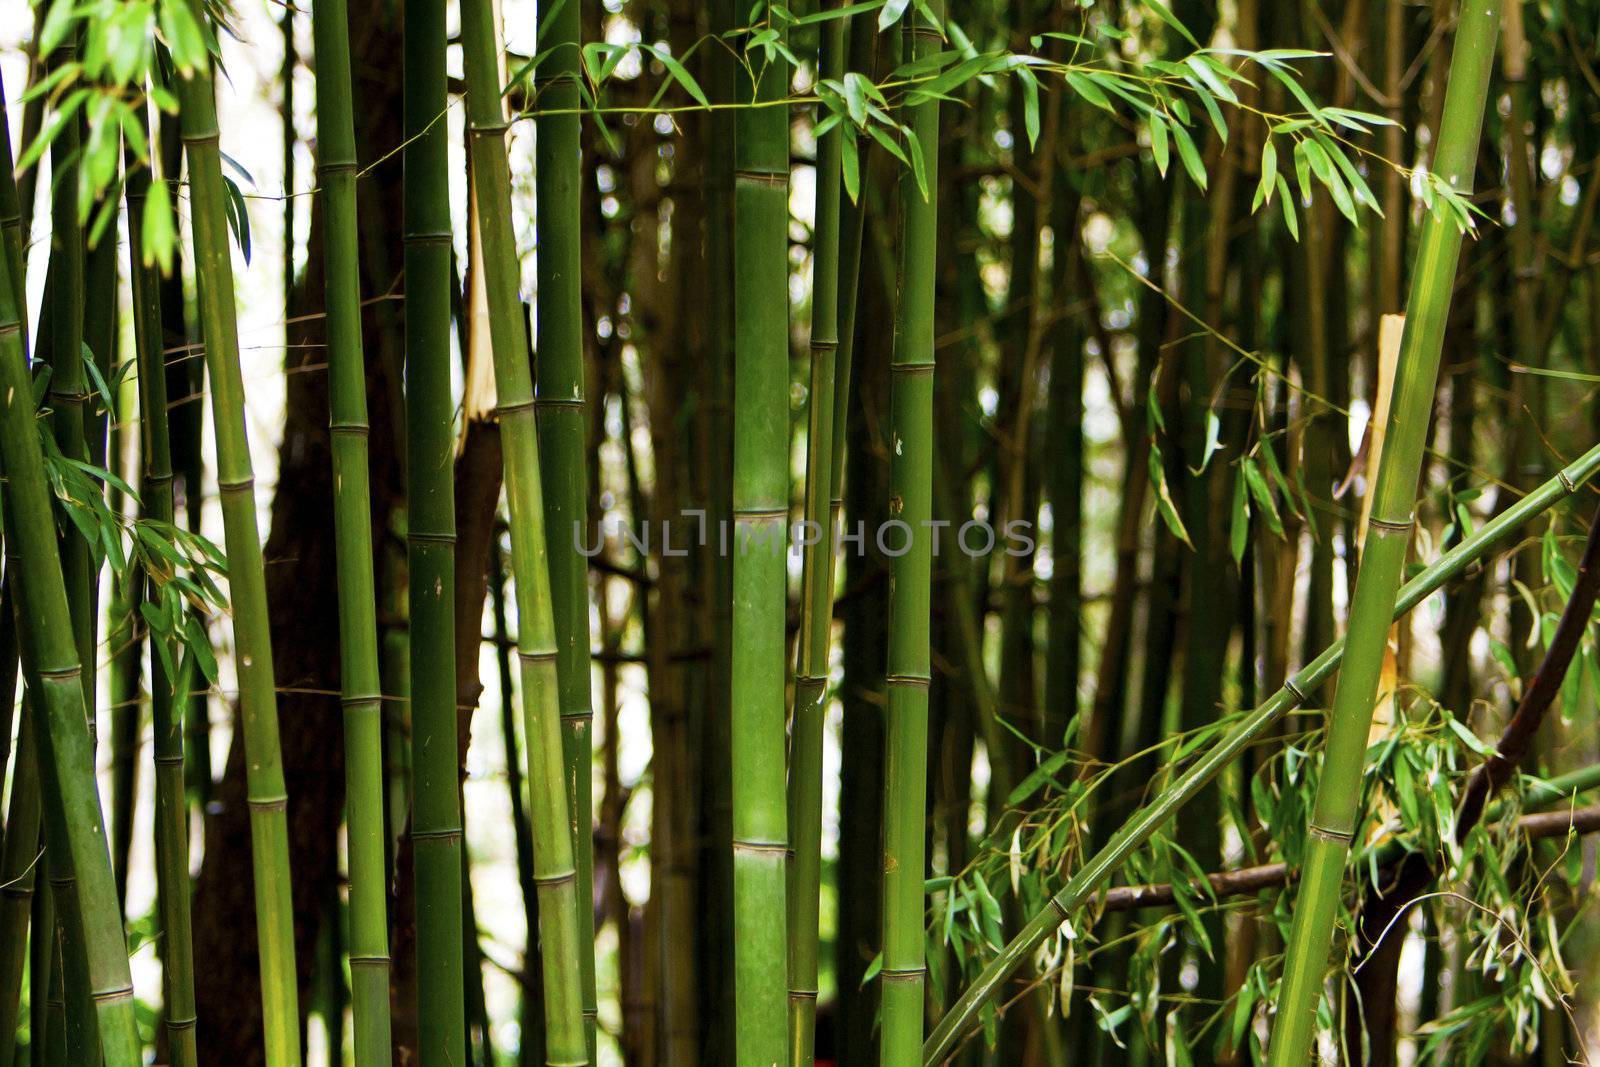 Trees of the green bamboo forest.